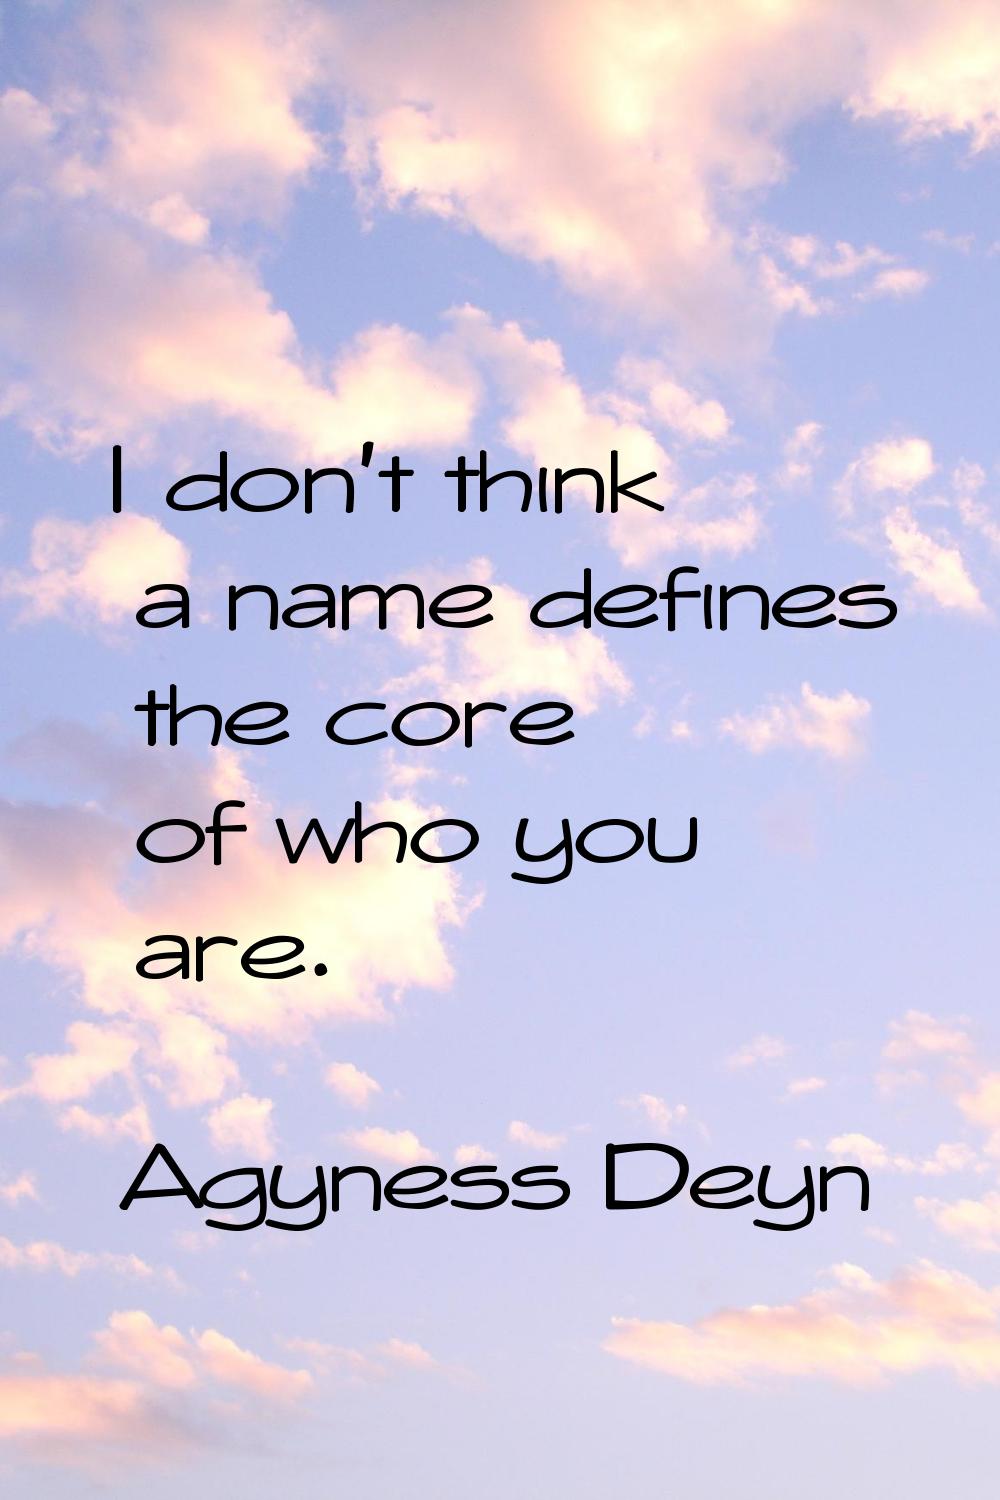 I don't think a name defines the core of who you are.